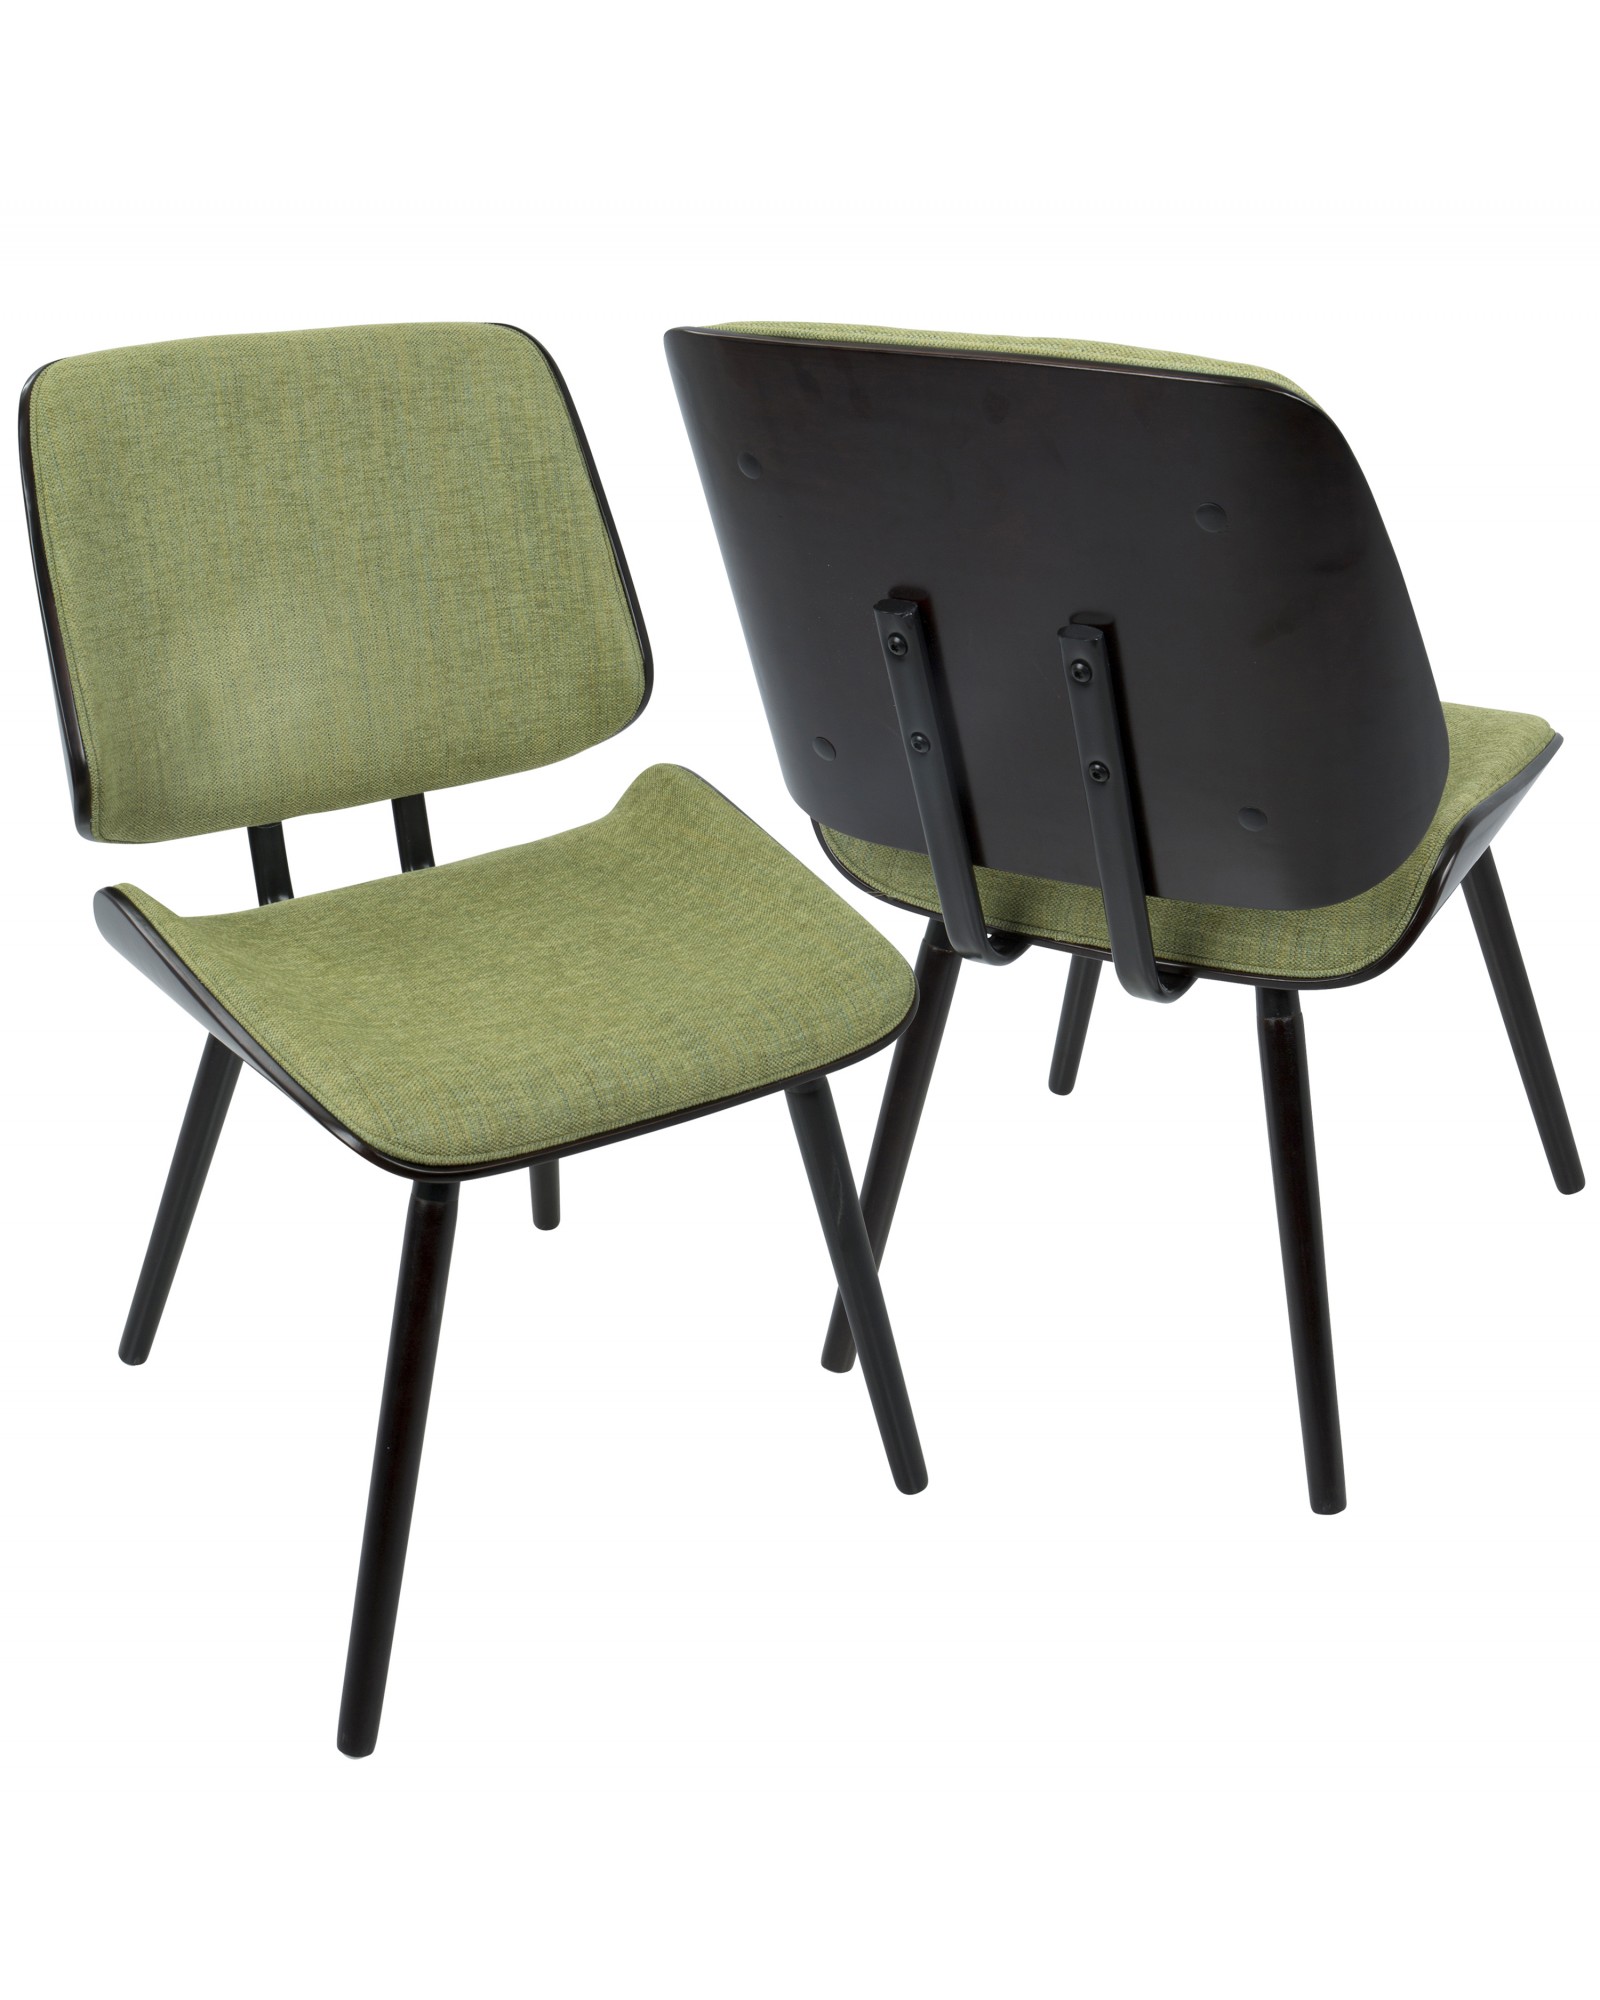 Lombardi Mid-Century Modern Dining/Accent Chair in Espresso with Green Fabric - Set of 2